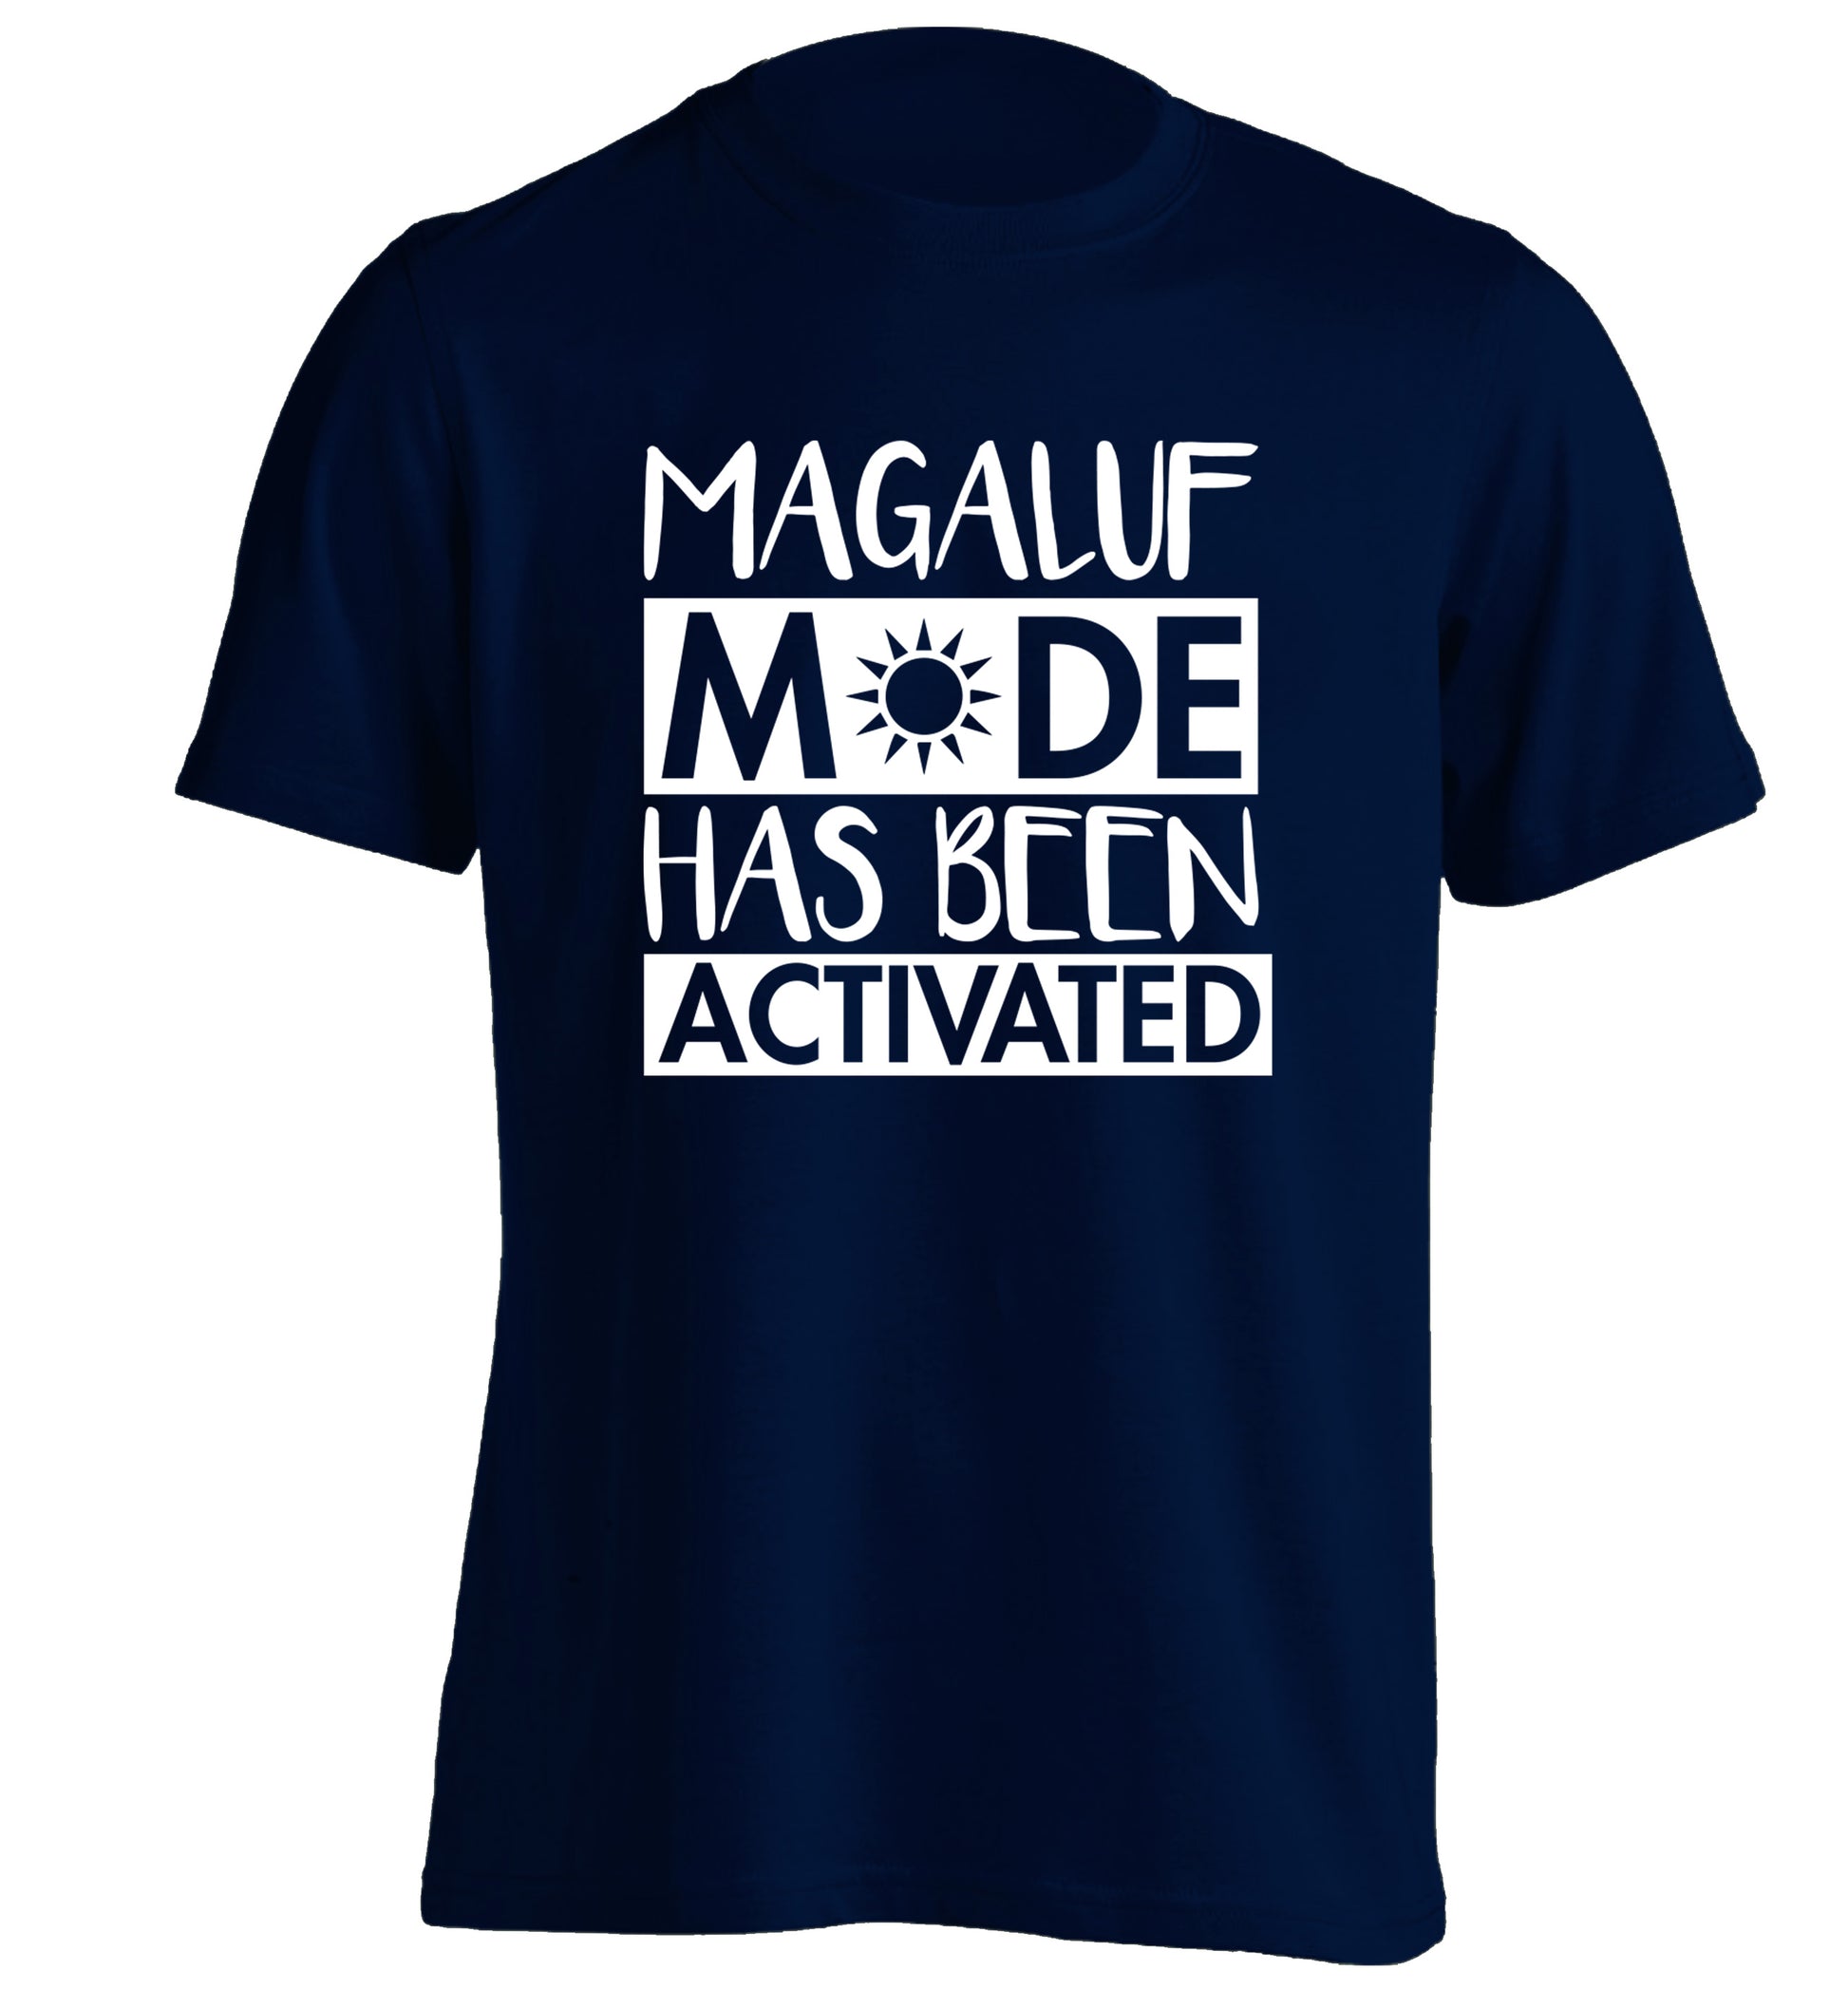 Magaluf mode has been activated adults unisex navy Tshirt 2XL